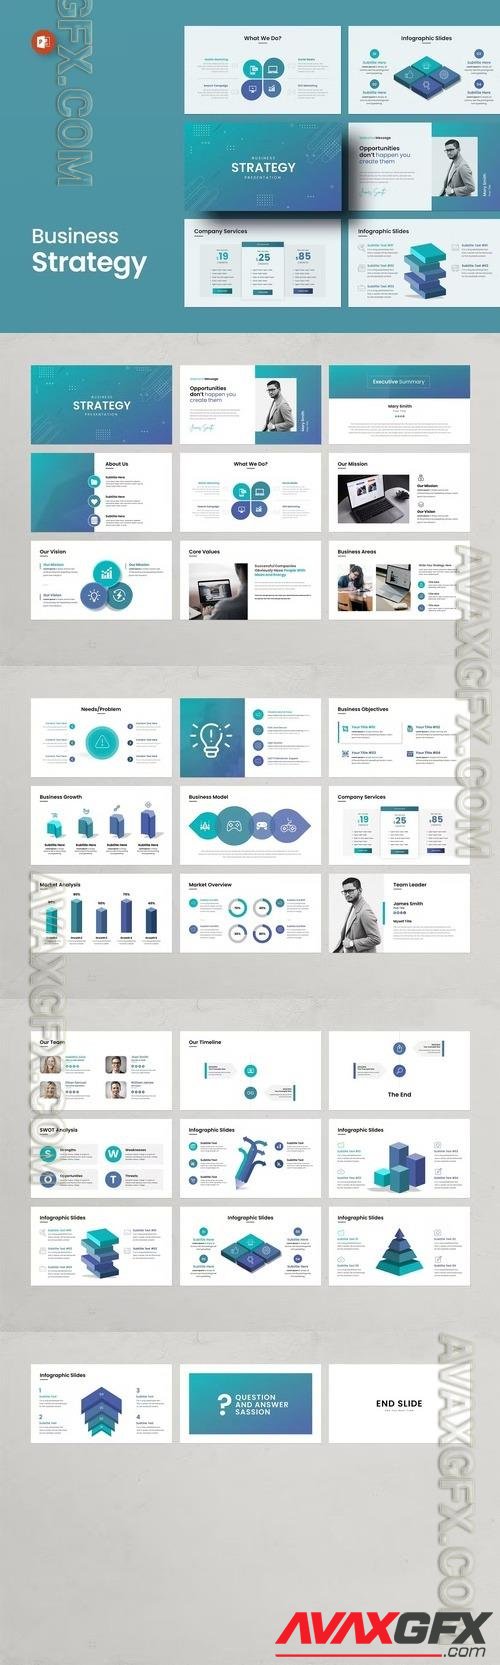 Business Strategy PowerPoint Presentation Template [PPTX]